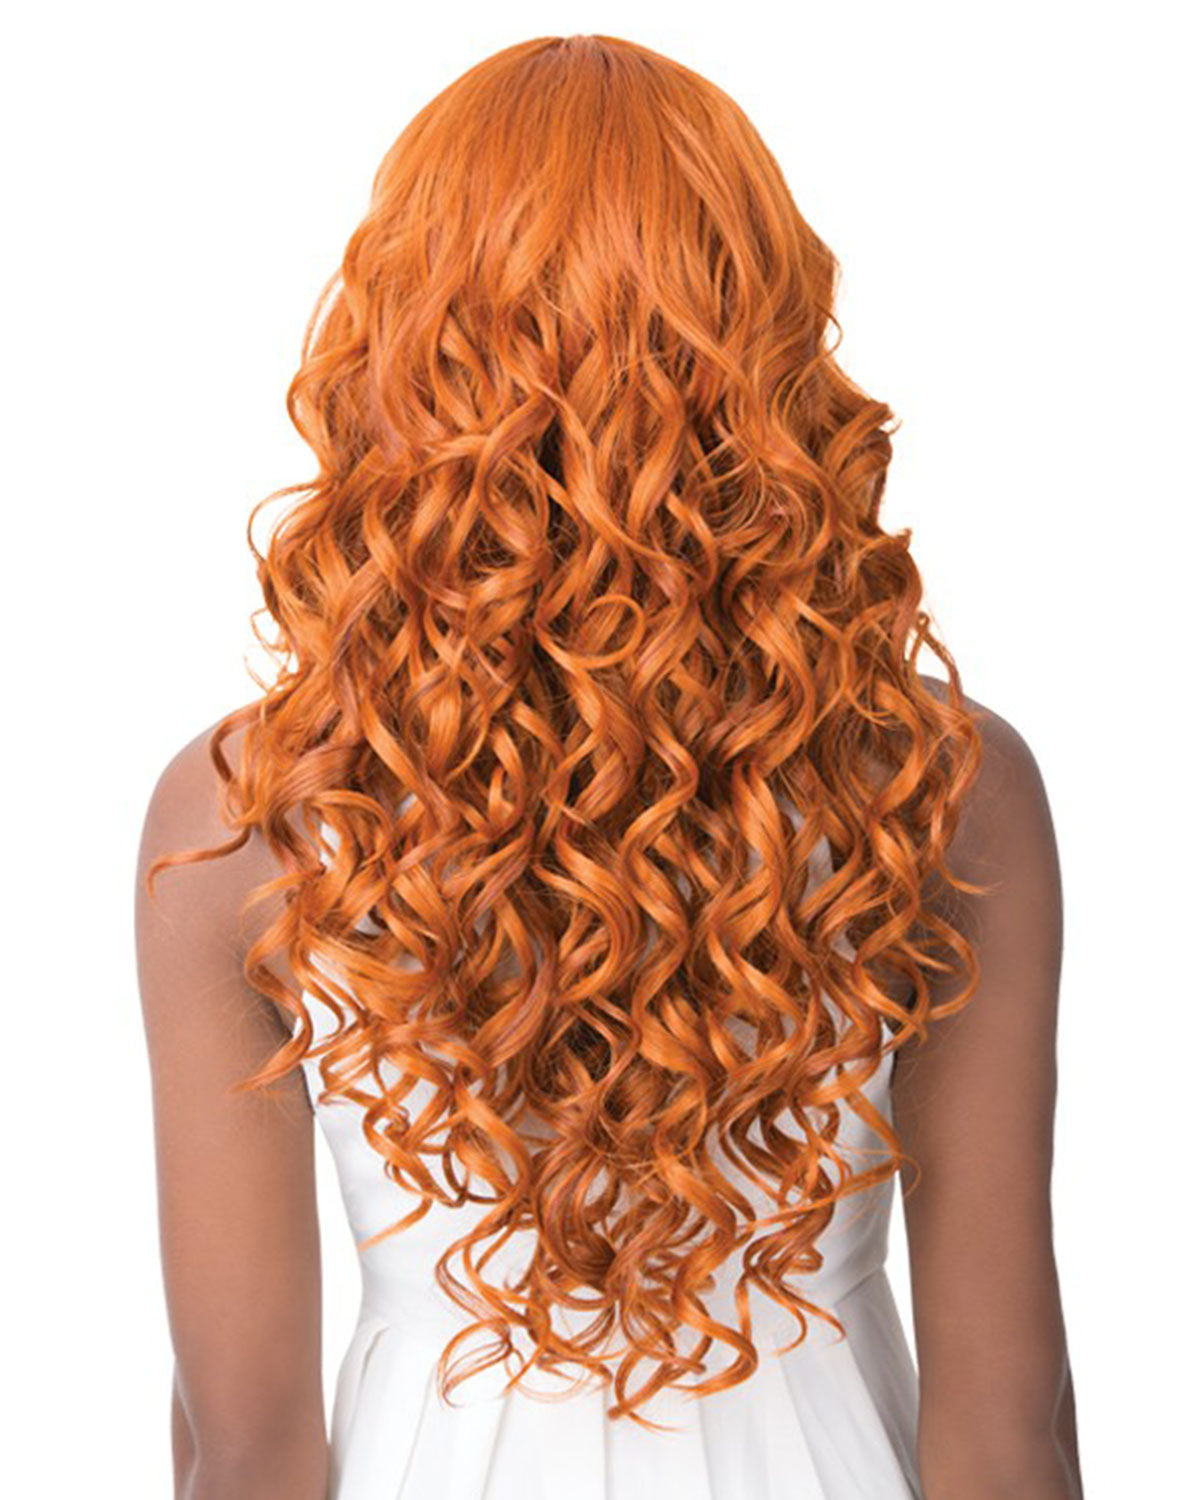 Swiss Lace Houston | Lace Front Synthetic Wig by It's a Wig